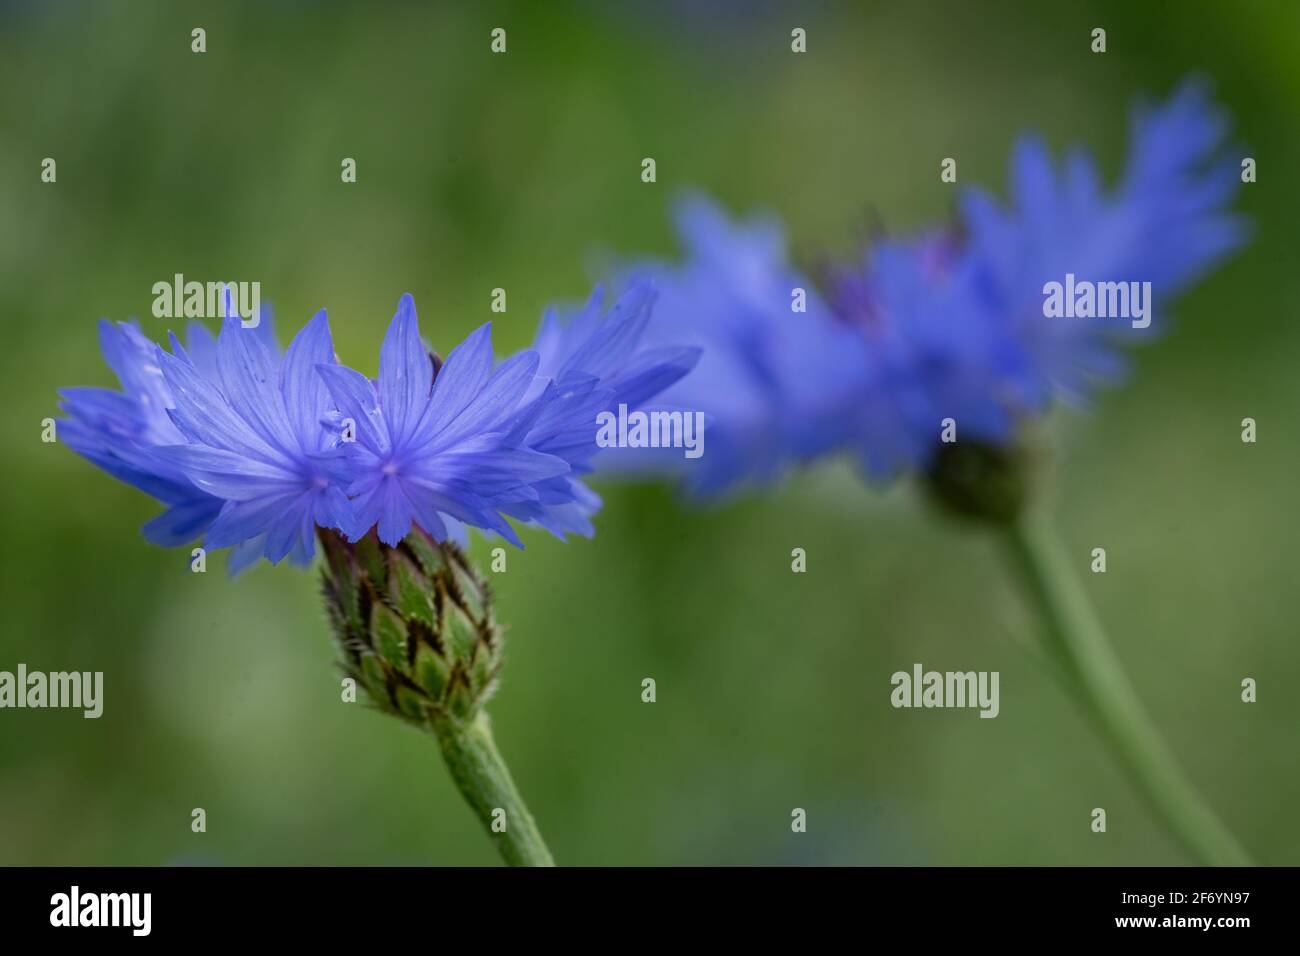 Pair of cornflowers with shallow depth of field before a green outdoor background Stock Photo